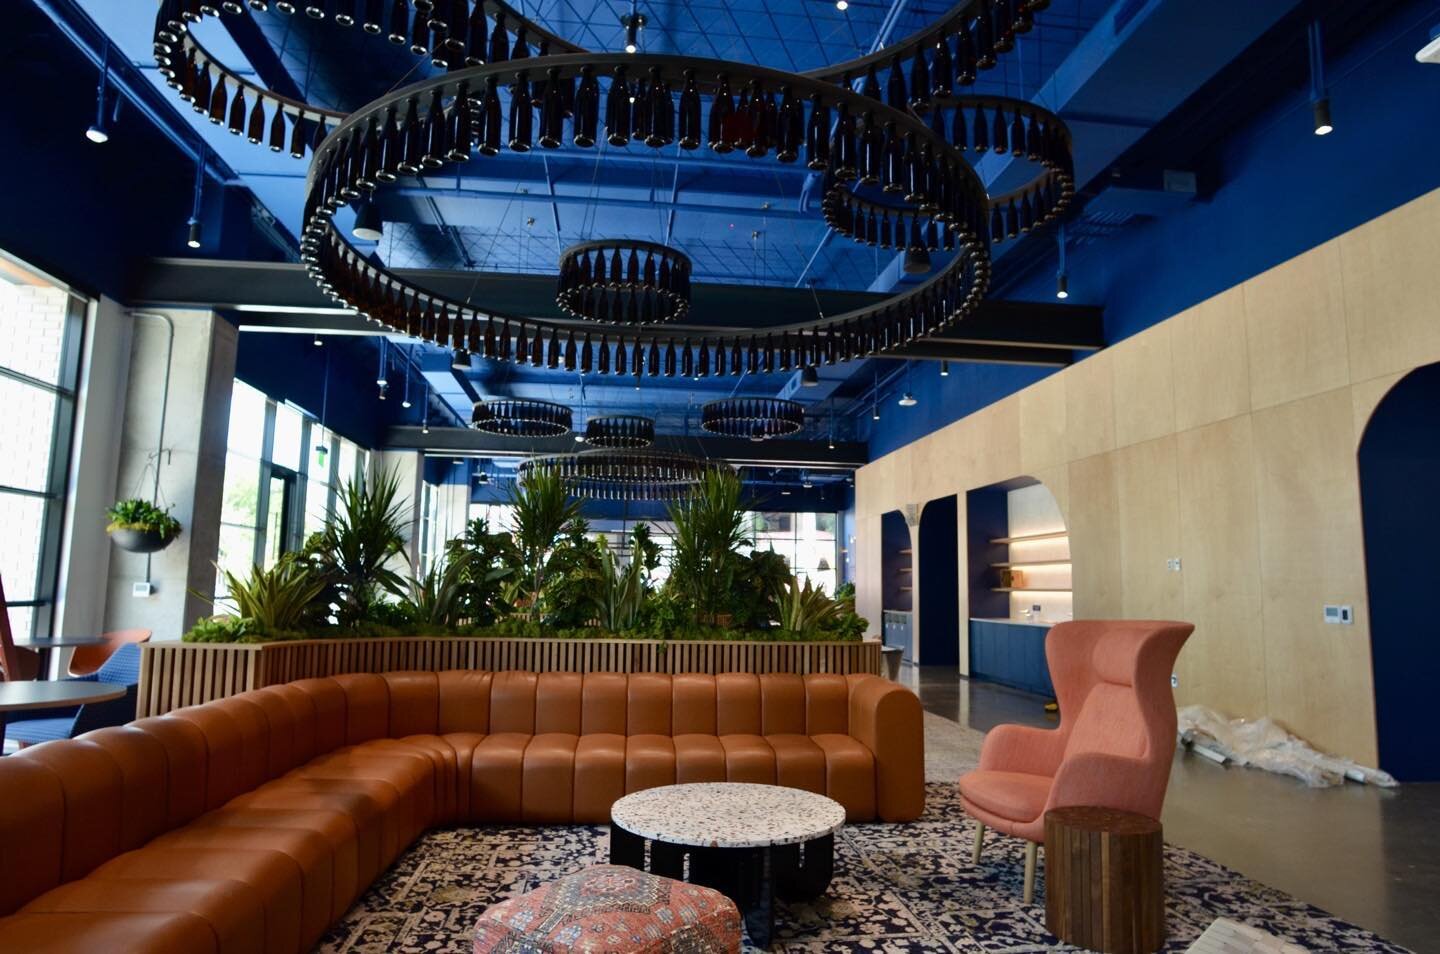 Atlassian austin lobby - the bottle features hang from steel cables bringing the space down to a more human scale, accented by faux beams that give the impression of substantial structure. designed by Mithun construction by Harvey Cleary